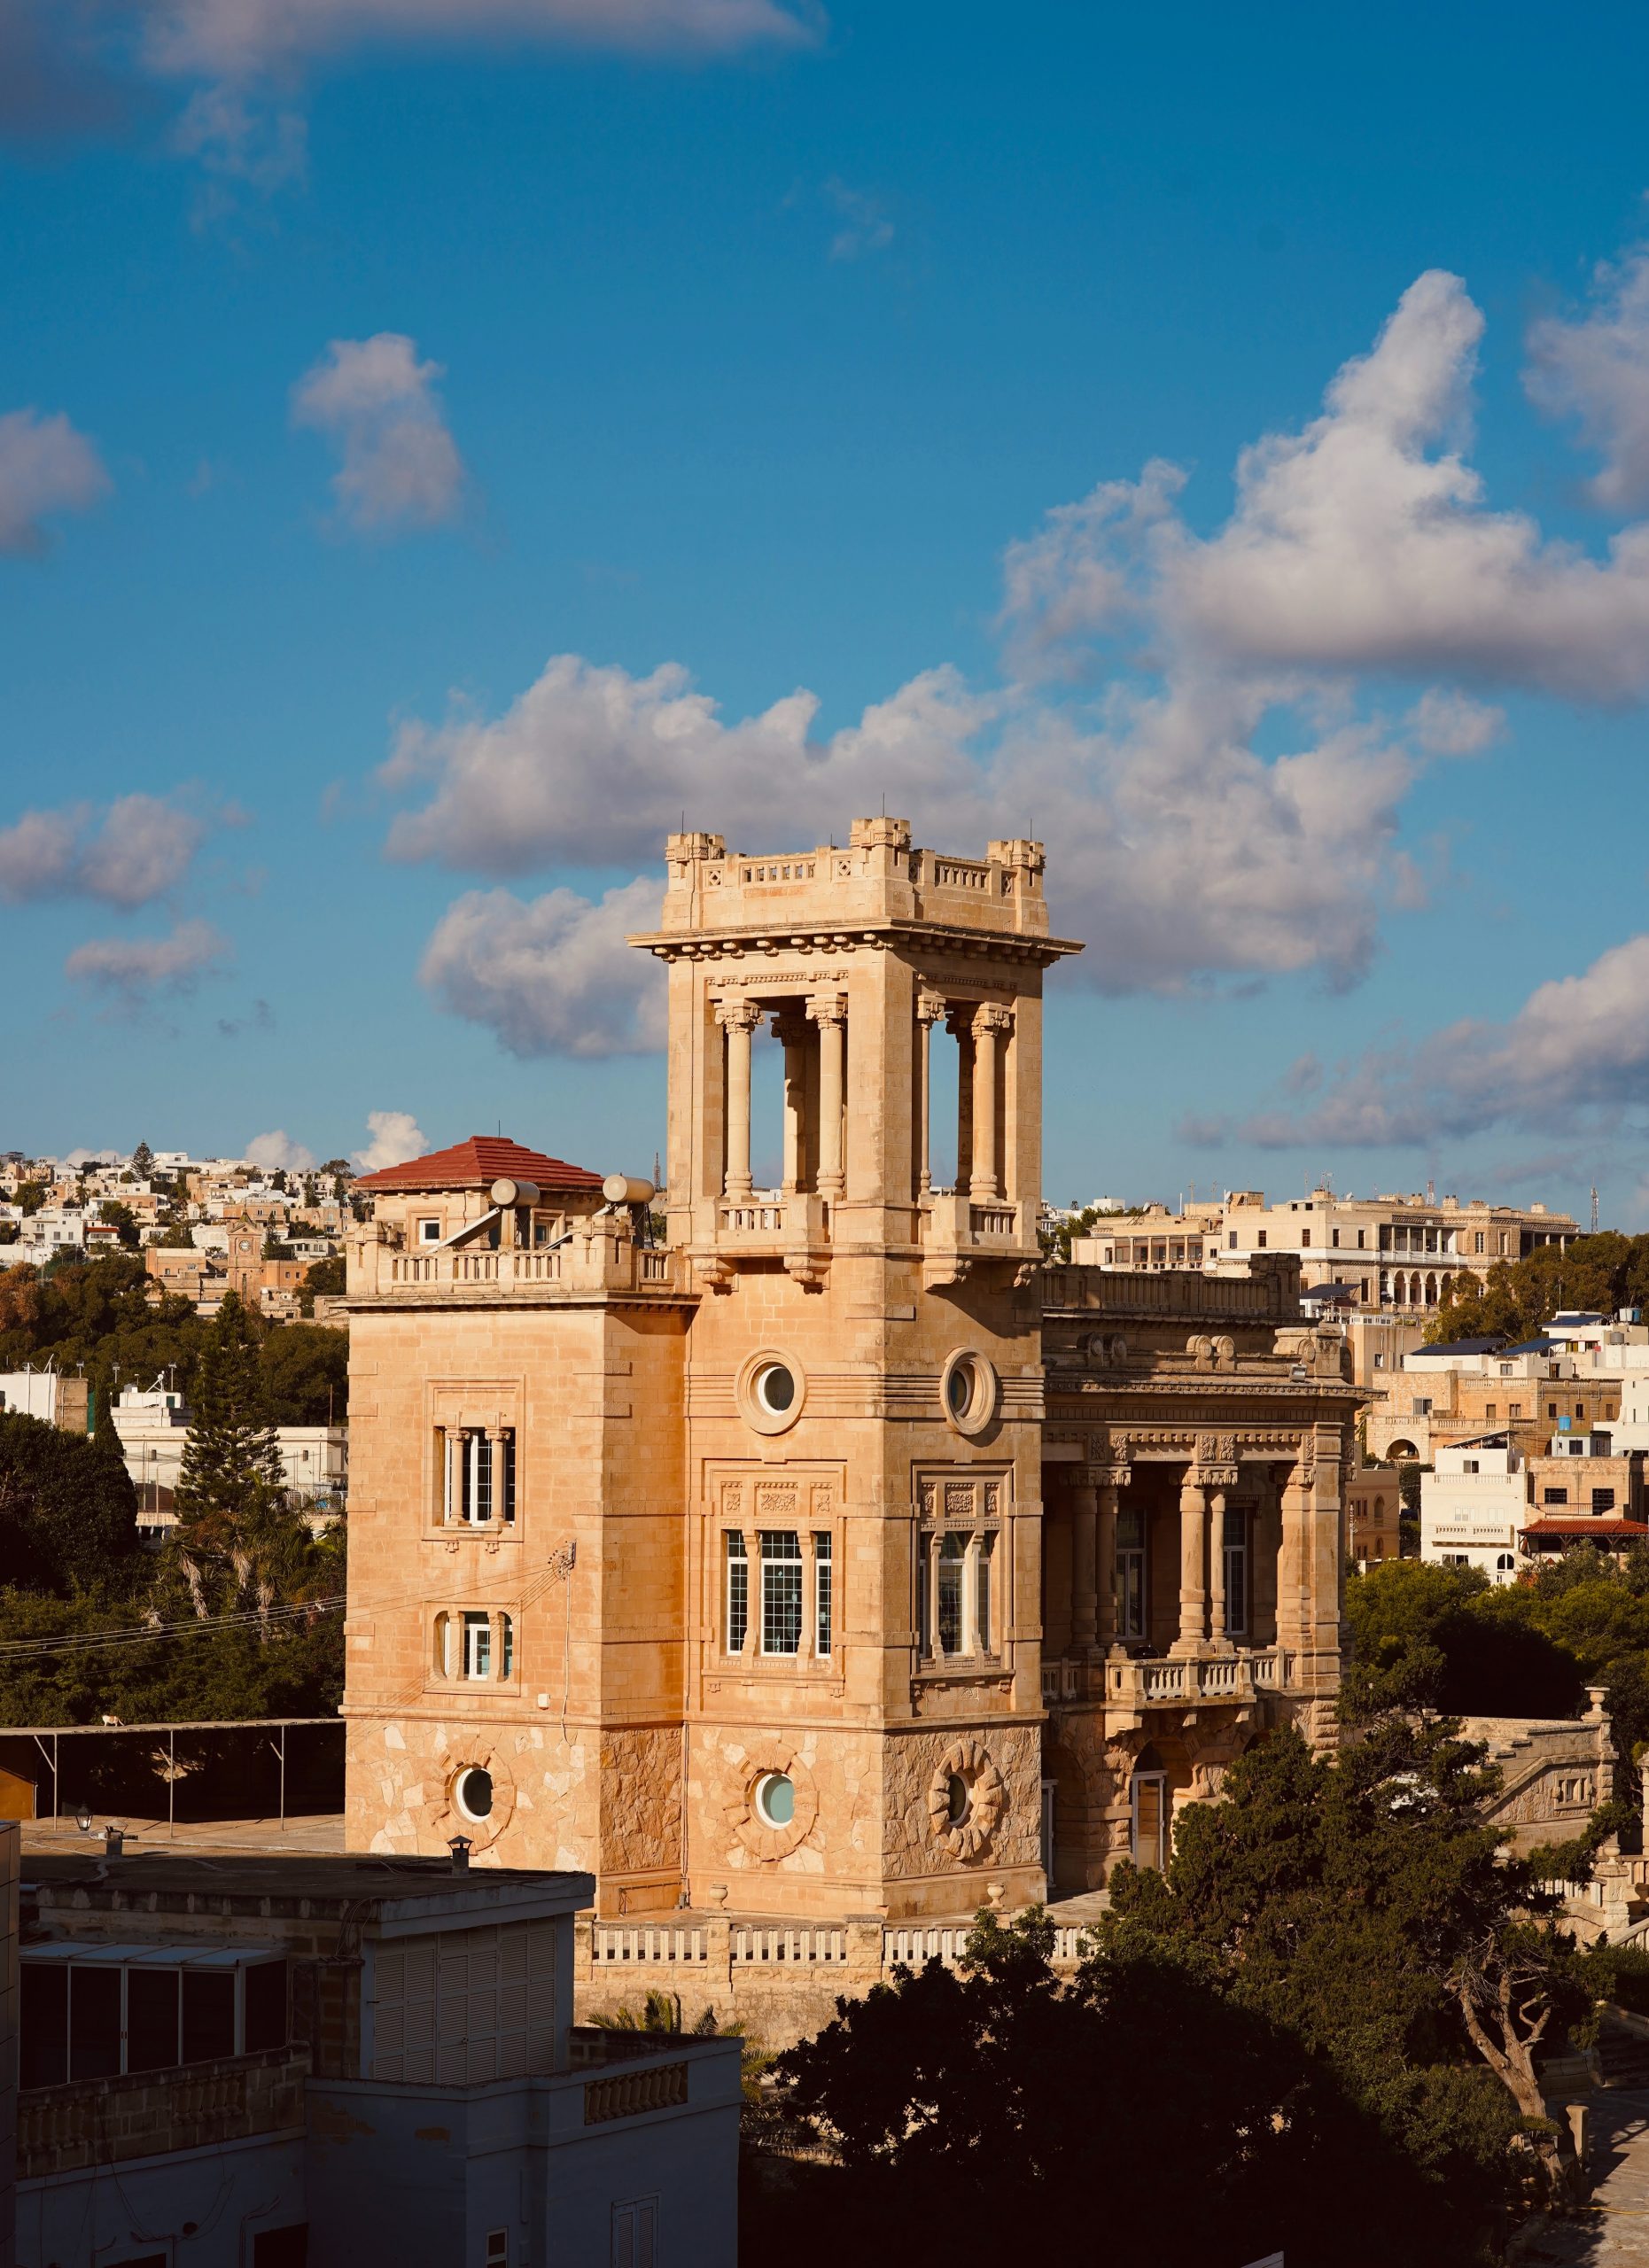 St Julian's Bay with its beautiful architecture and tower is a great place to stay in Malta